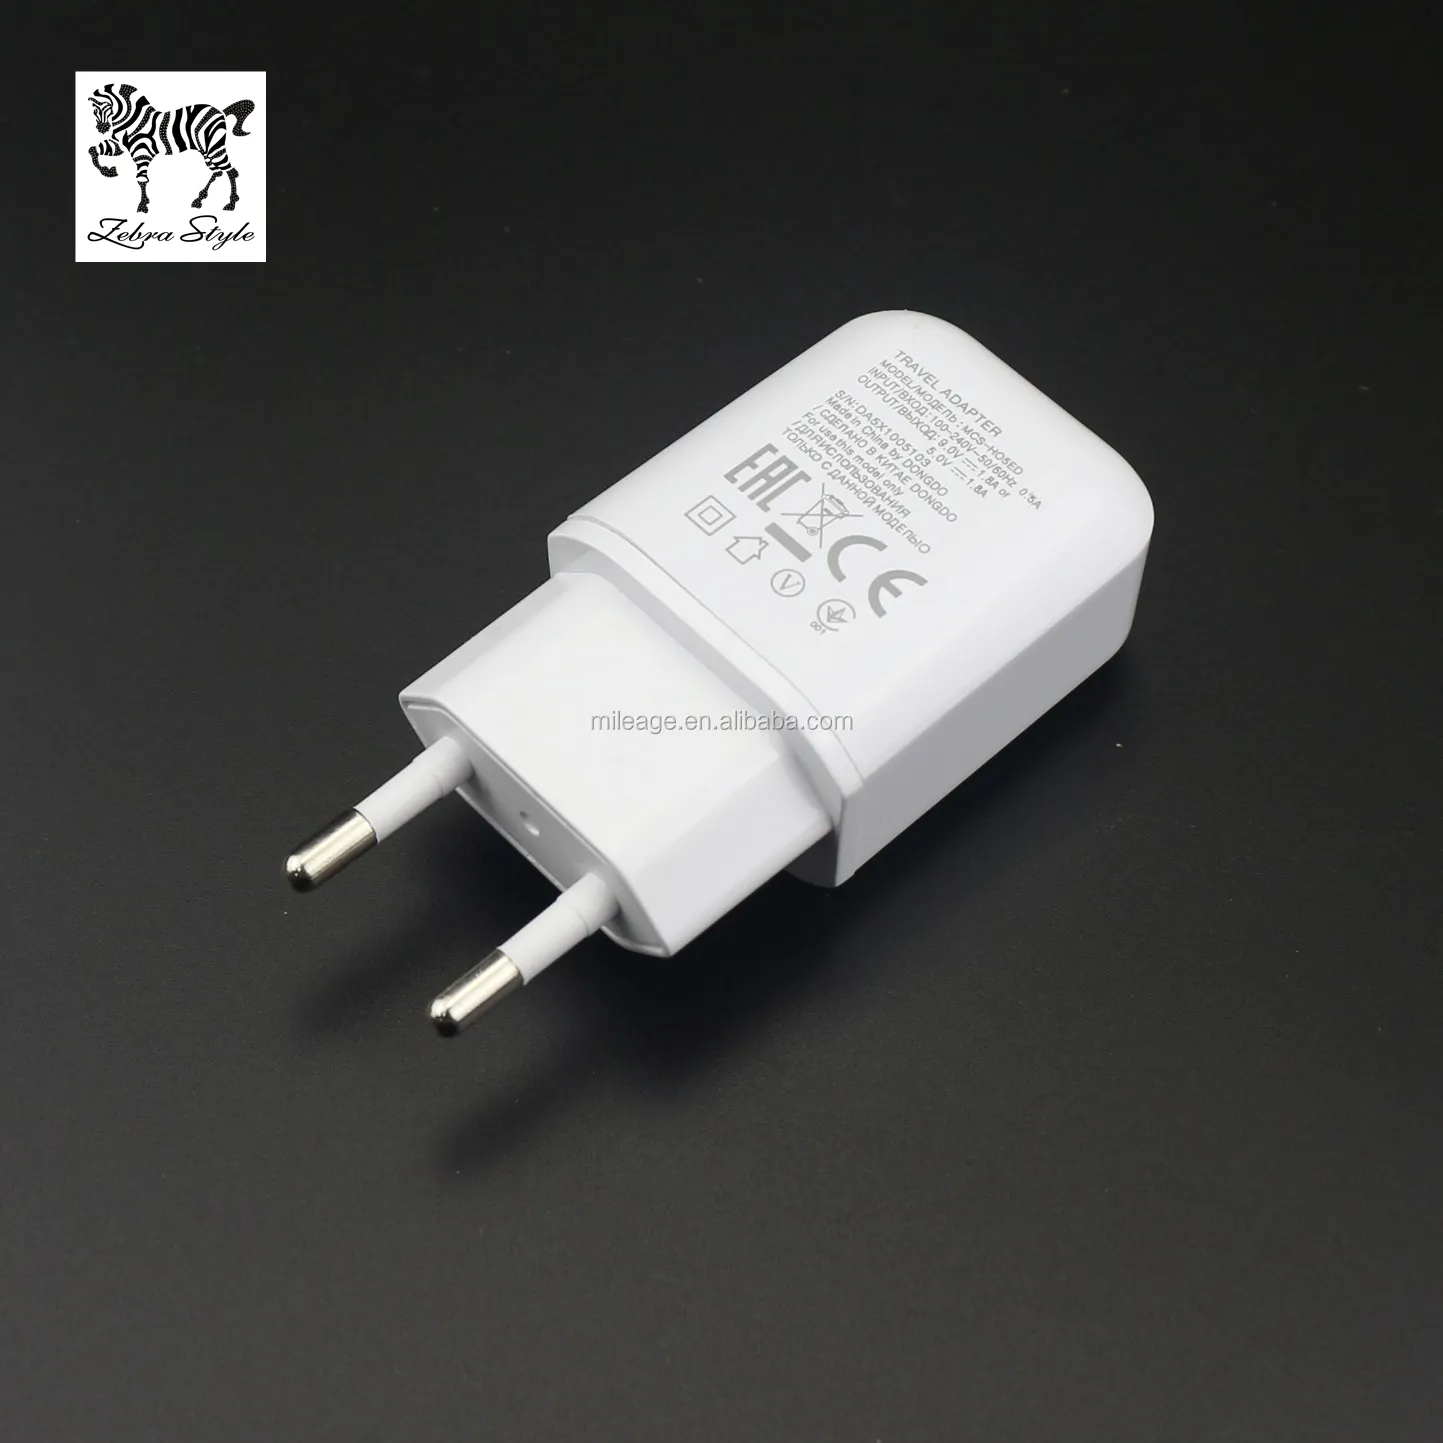 G5 voor LG Mobiele Telefoon Travel Wall Charger Originele MCS-H05ED 9V 1.8A 5V 1.8A Charger Adapter